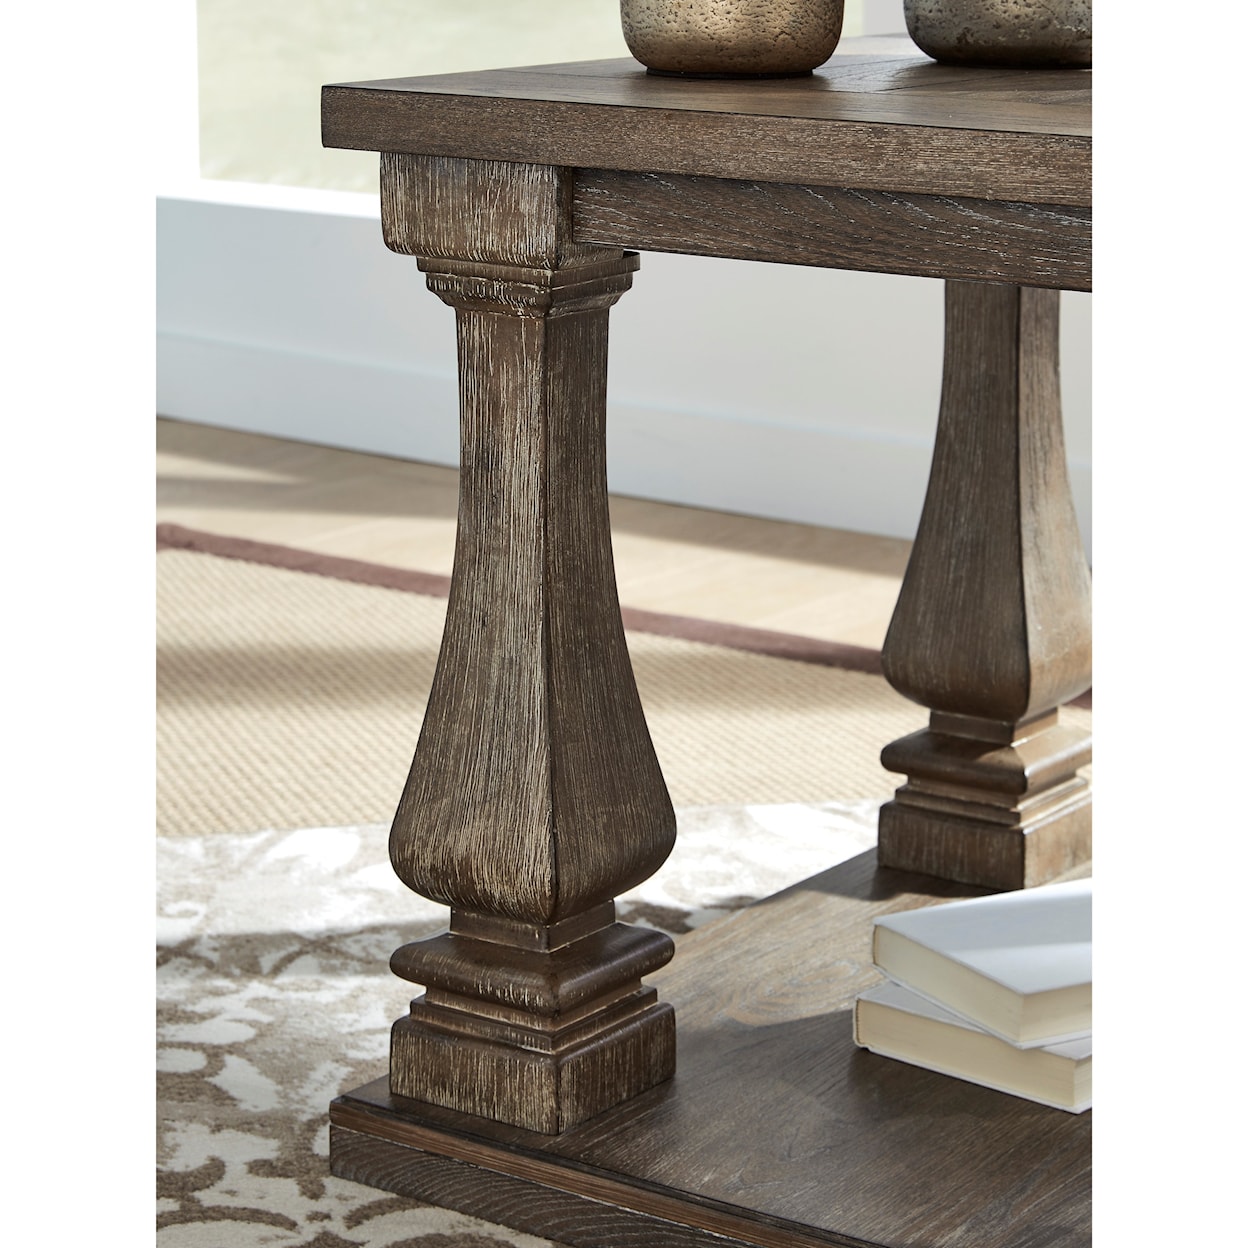 Signature Design by Ashley Johnelle Rectangular End Table